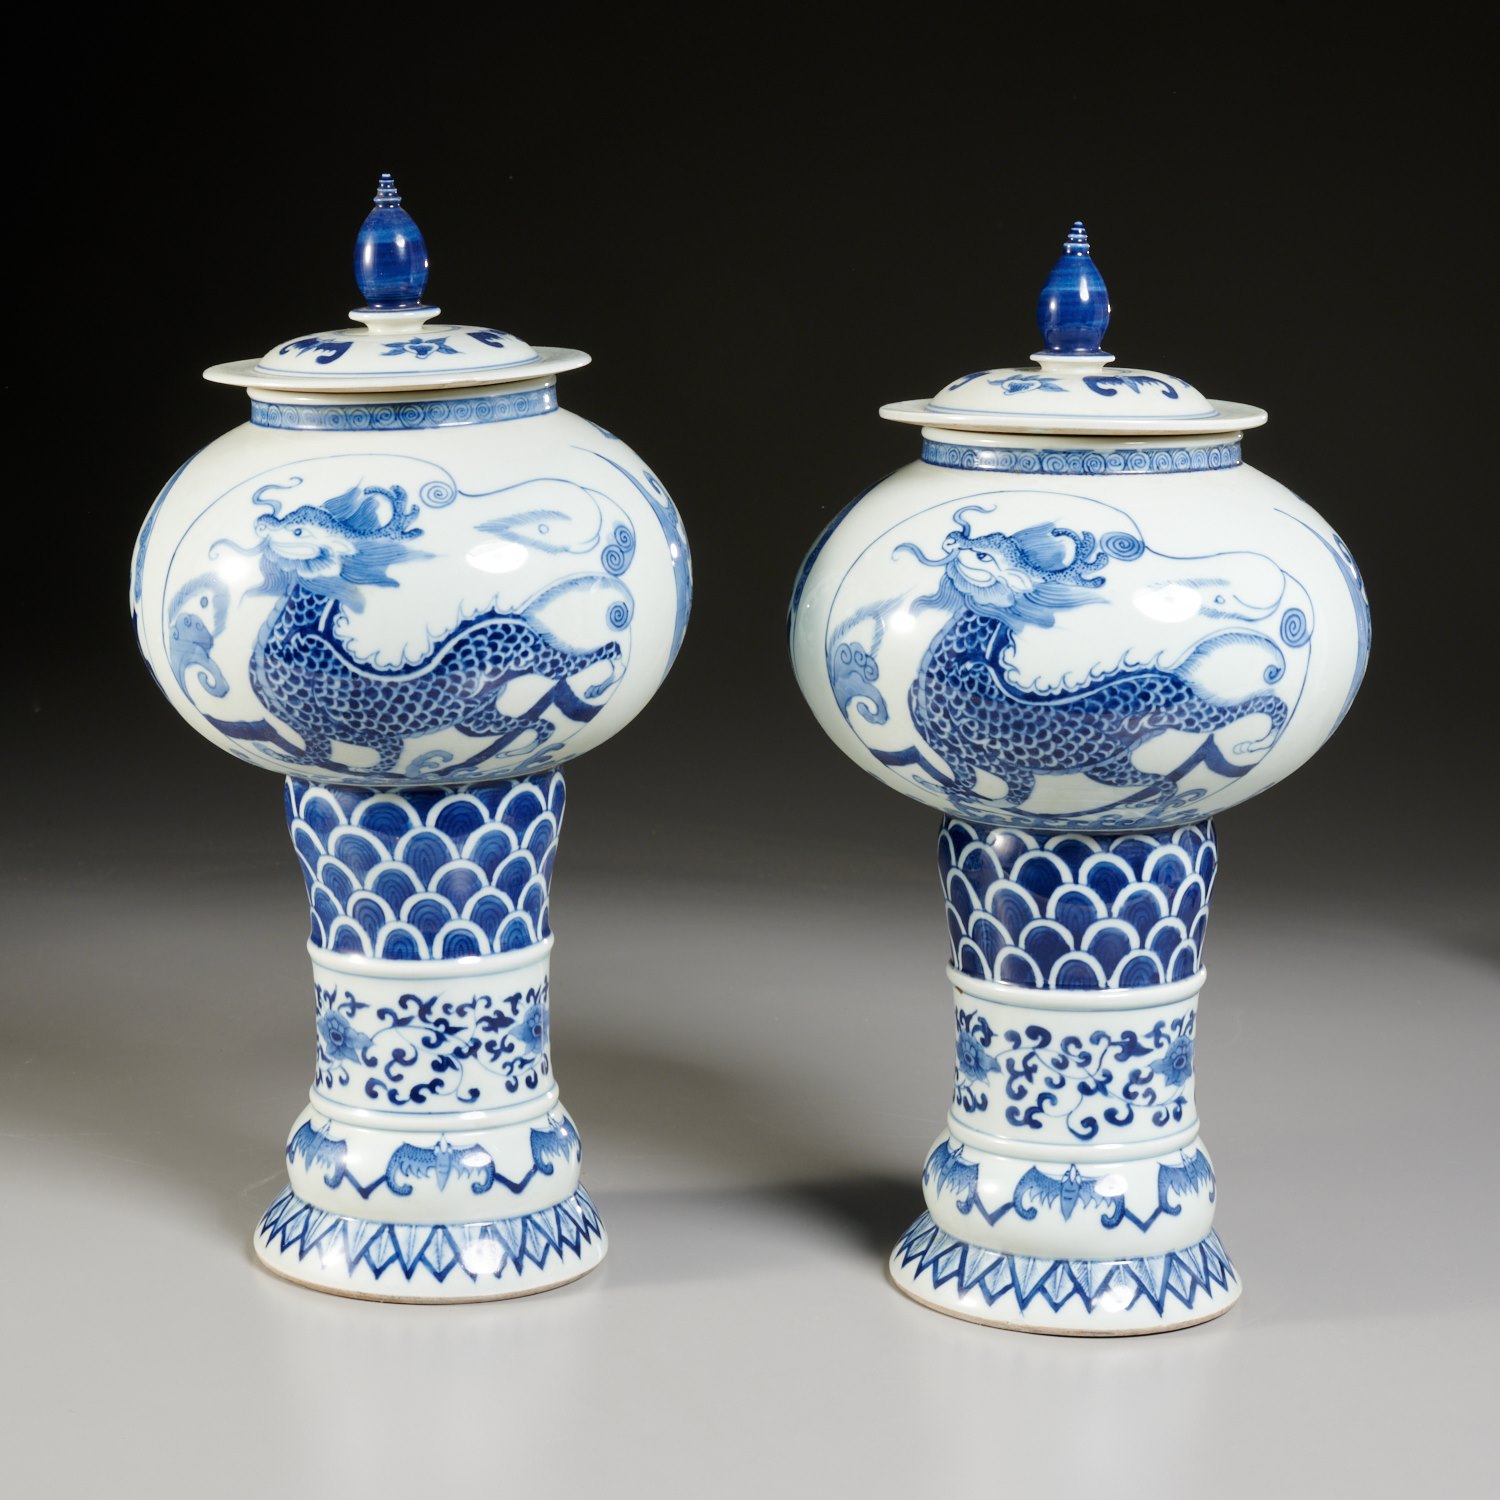 PAIR CHINESE BLUE AND WHITE JARS 2cdefe